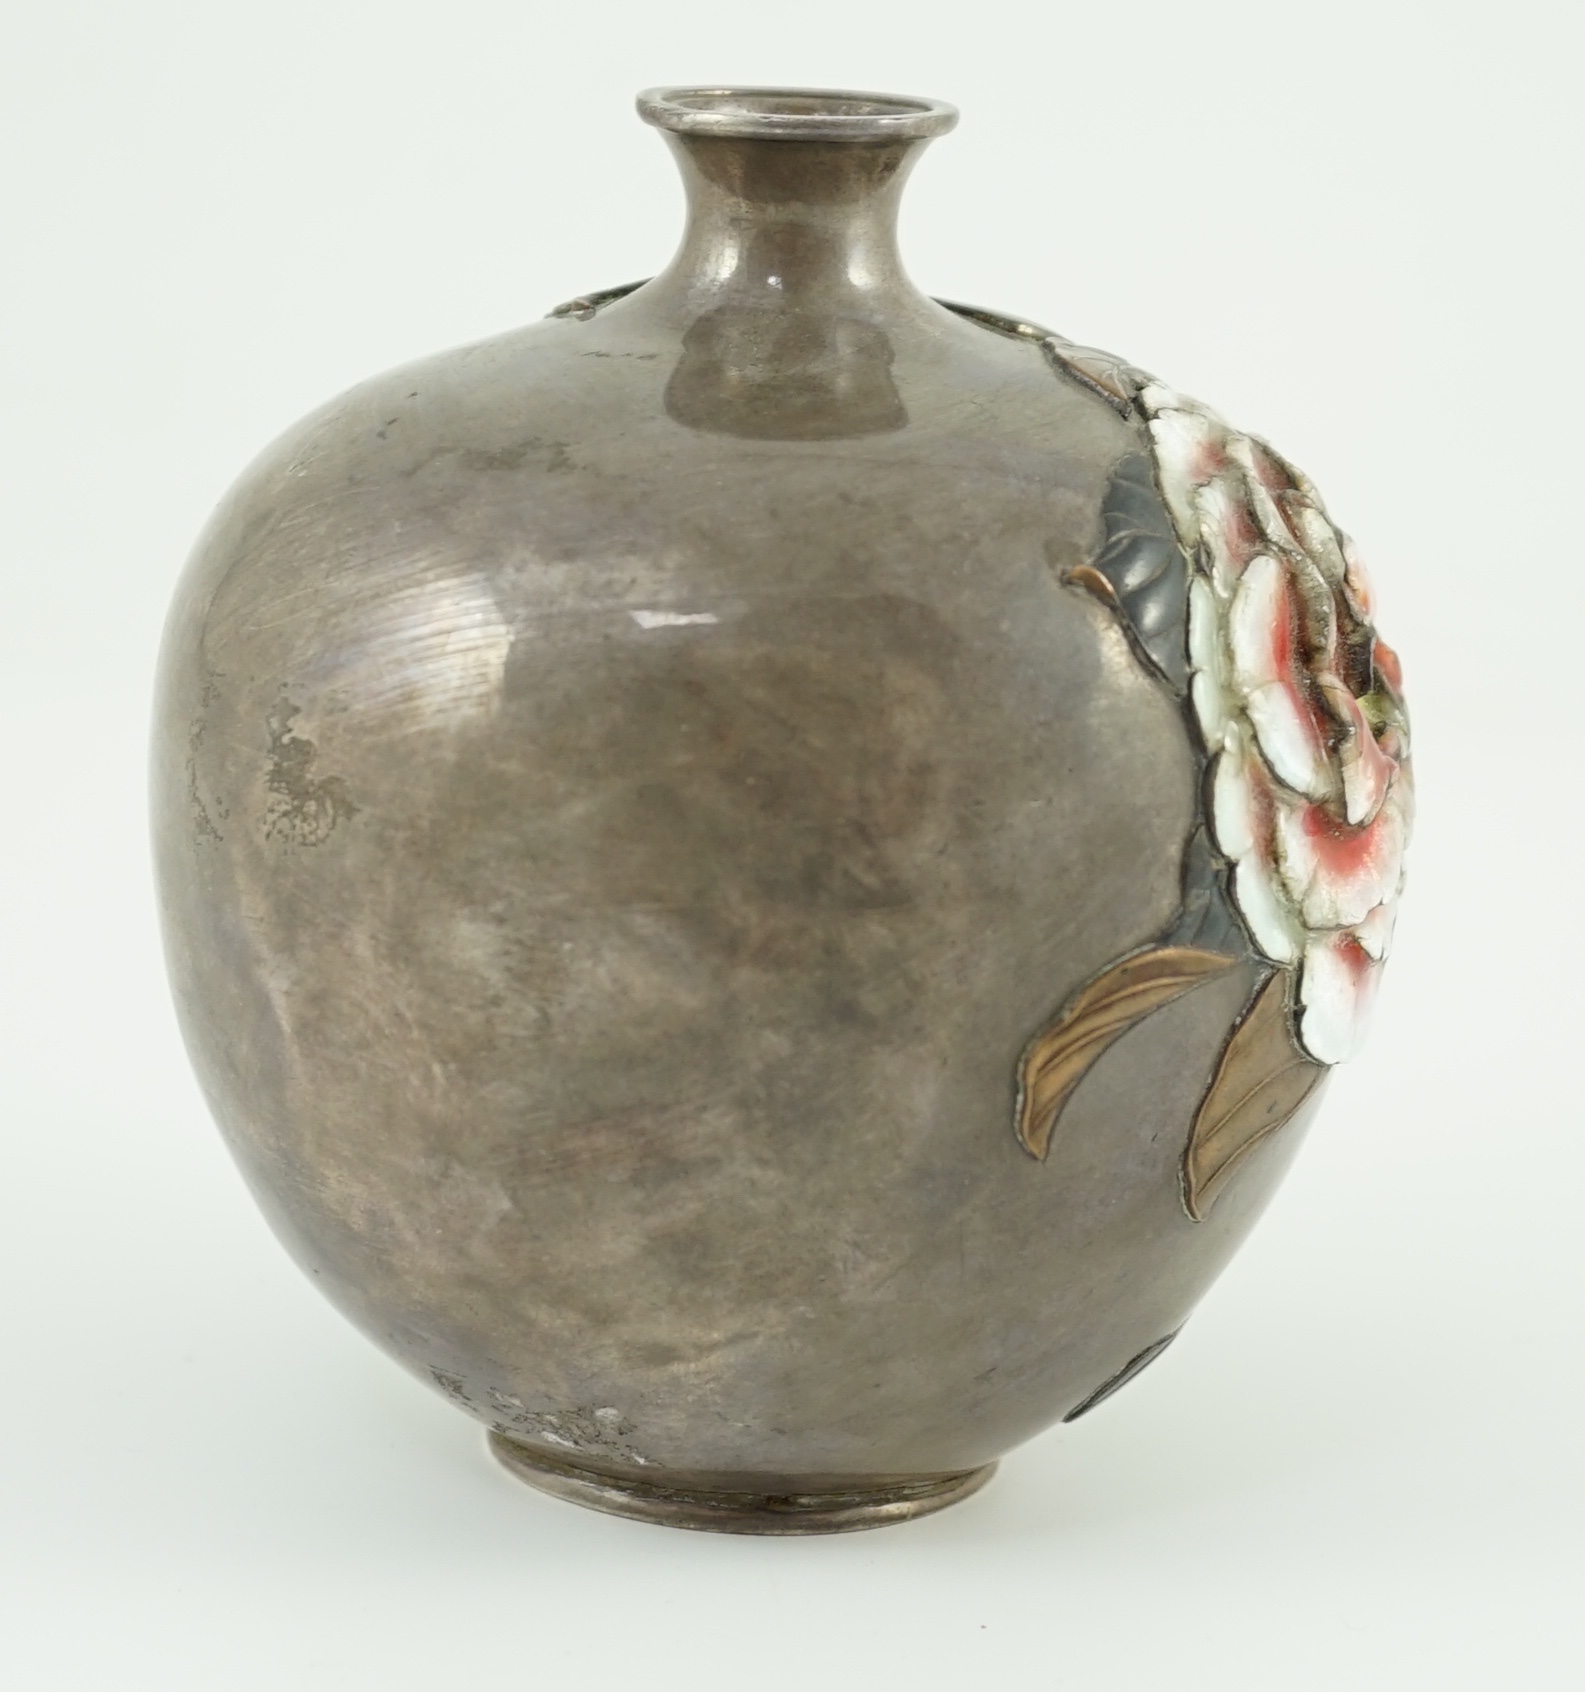 A Japanese silver, enamel and mixed metal vase, Meiji period, 12.5 cm high, dents